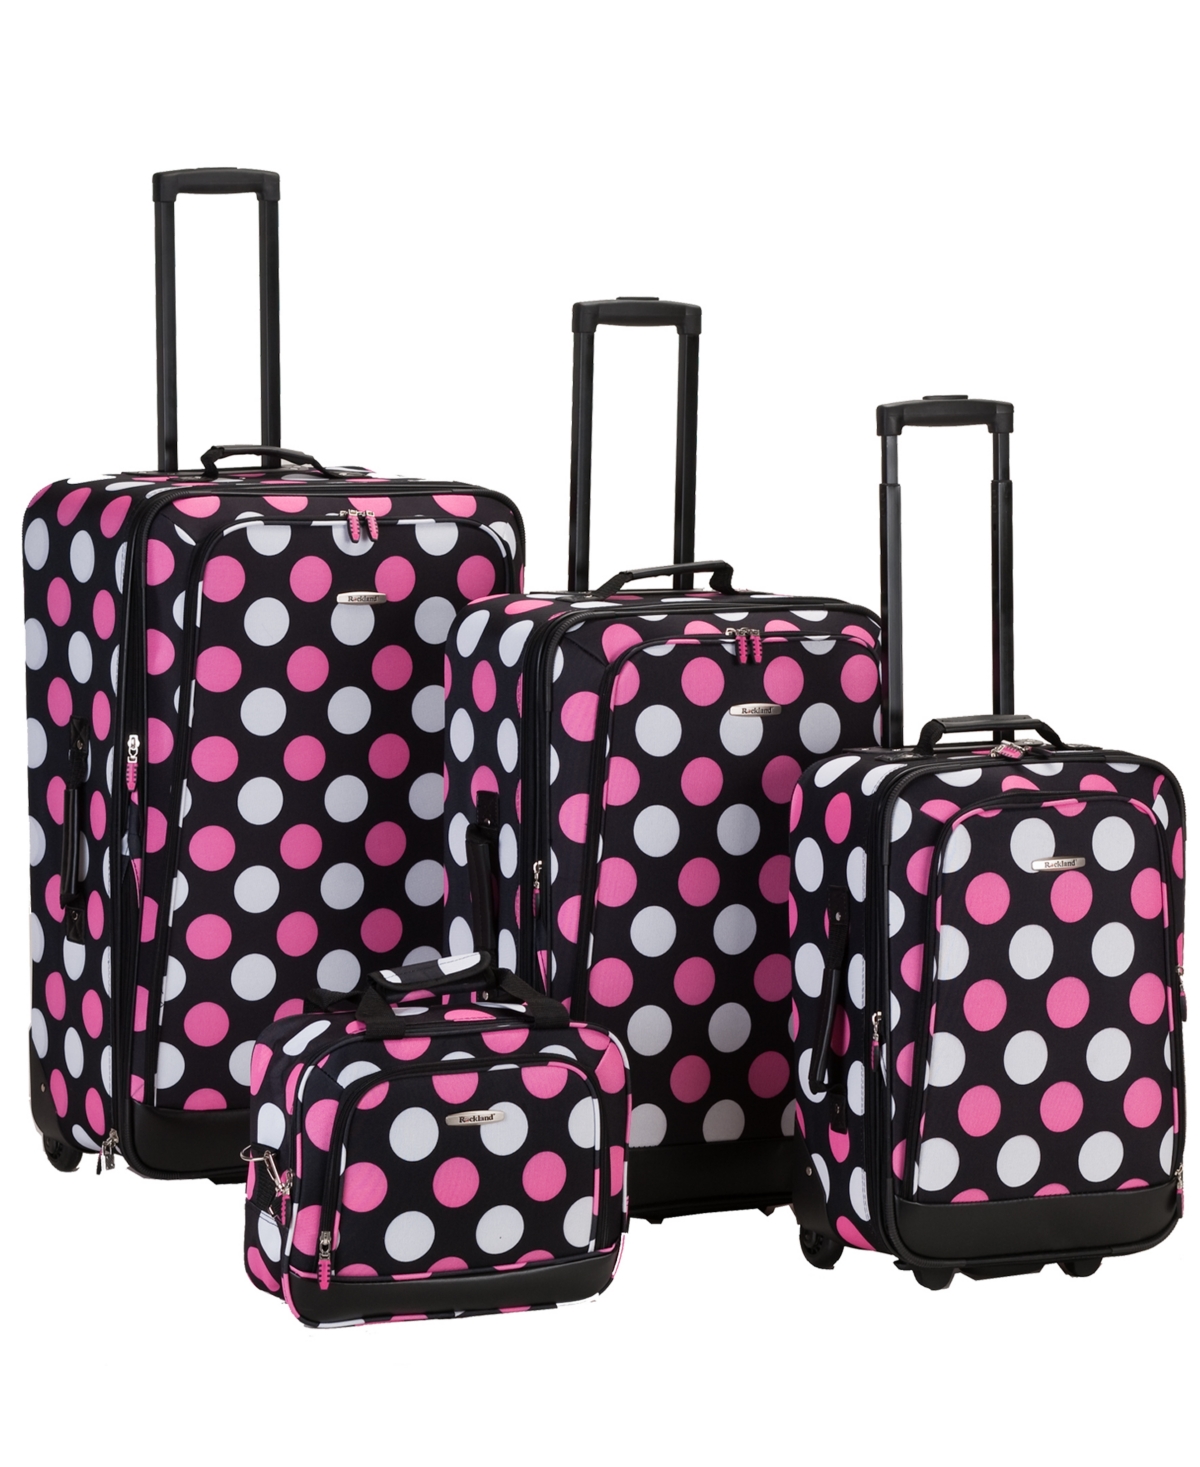 Rockland 4-pc. Softside Luggage Set In Pink  White Dots On Black